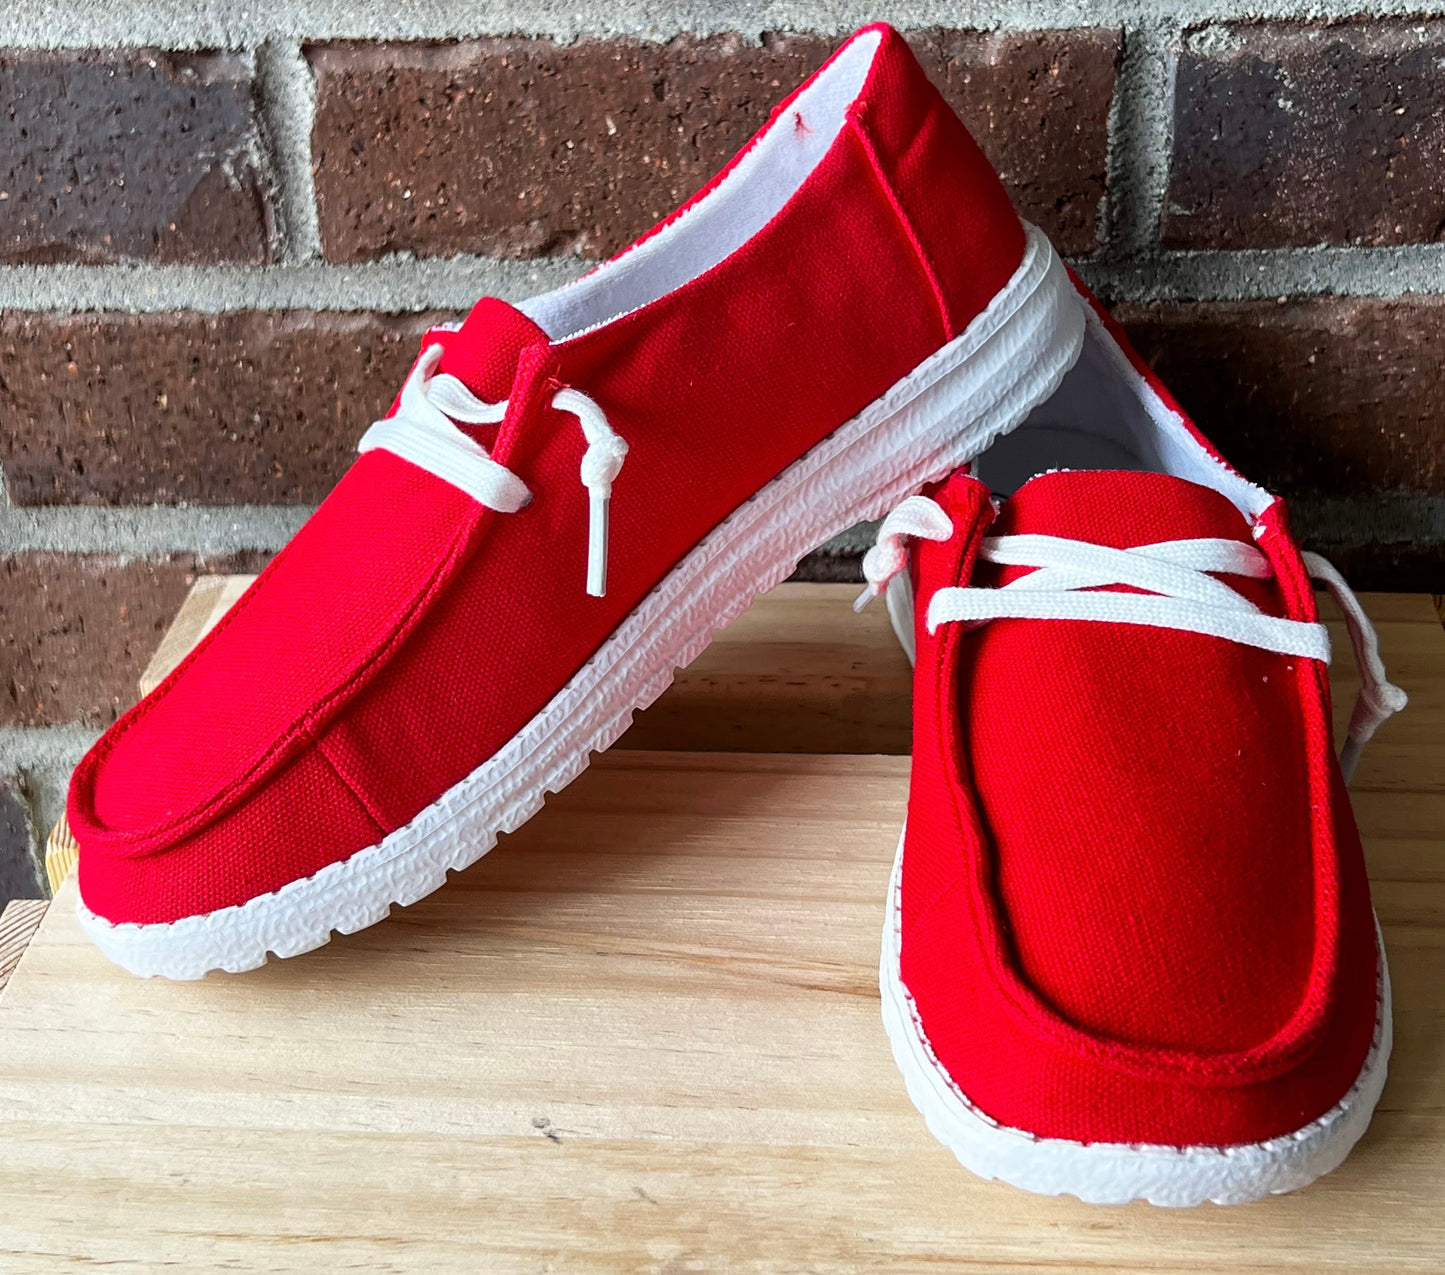 Gypsy Jazz Game Day Slip-on Sneakers - Red